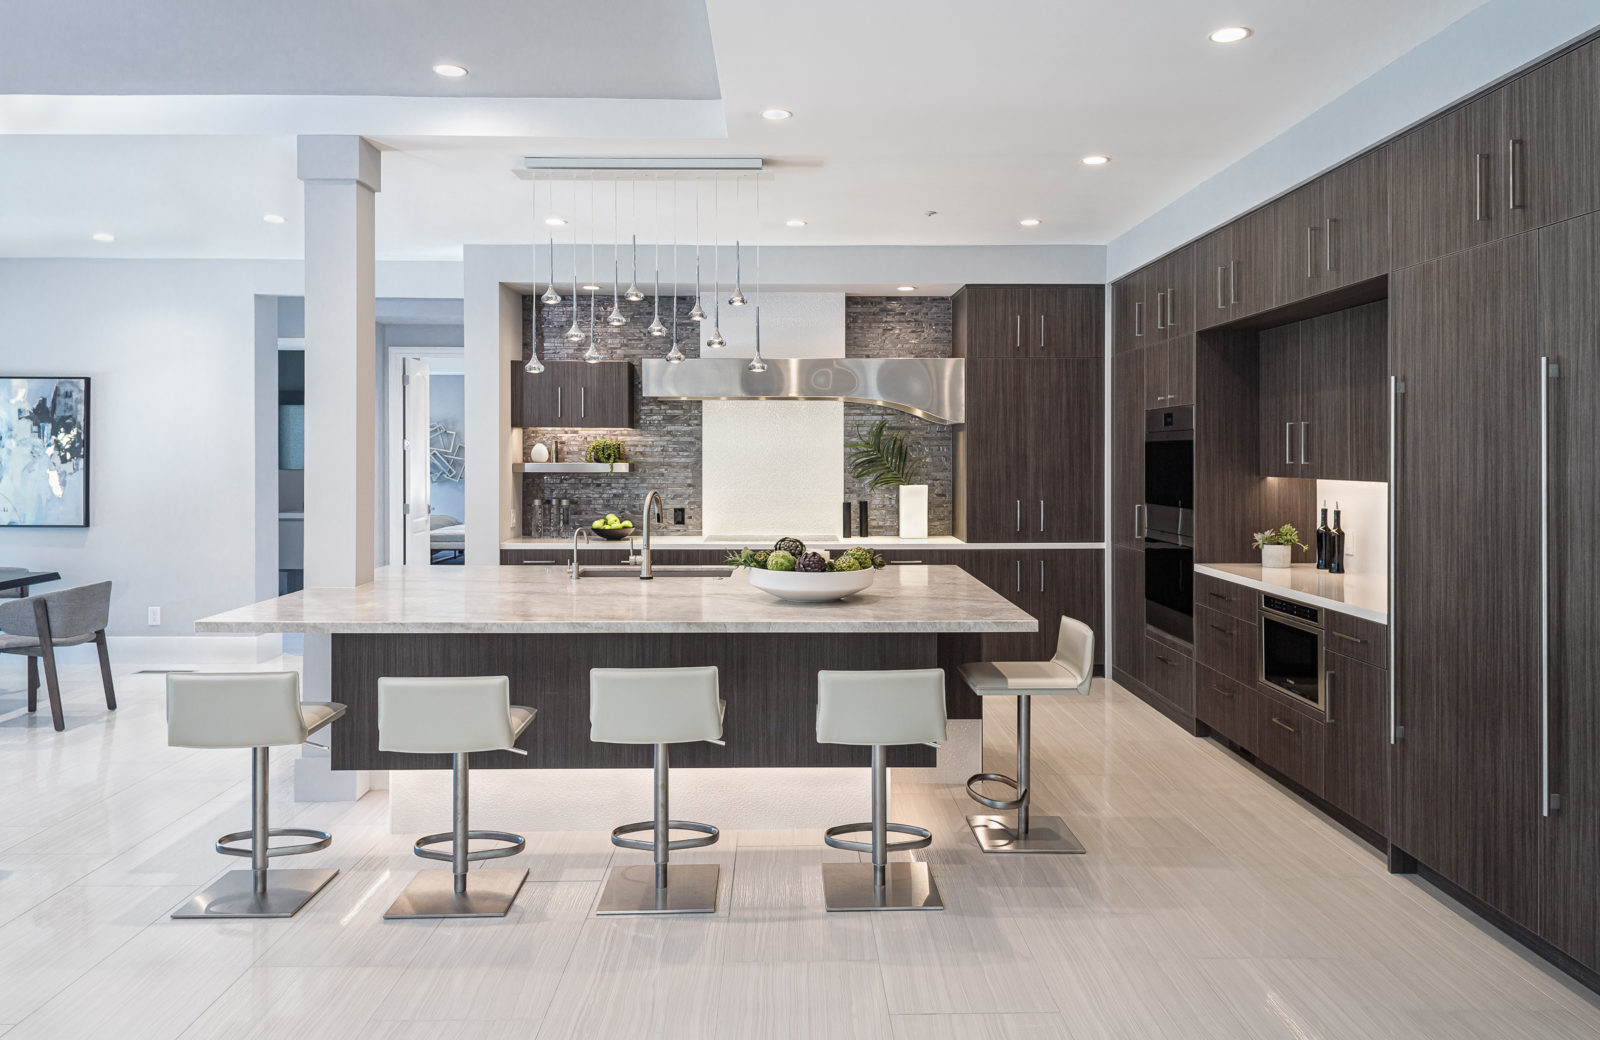 Kitchen with floating island and dark cabinets